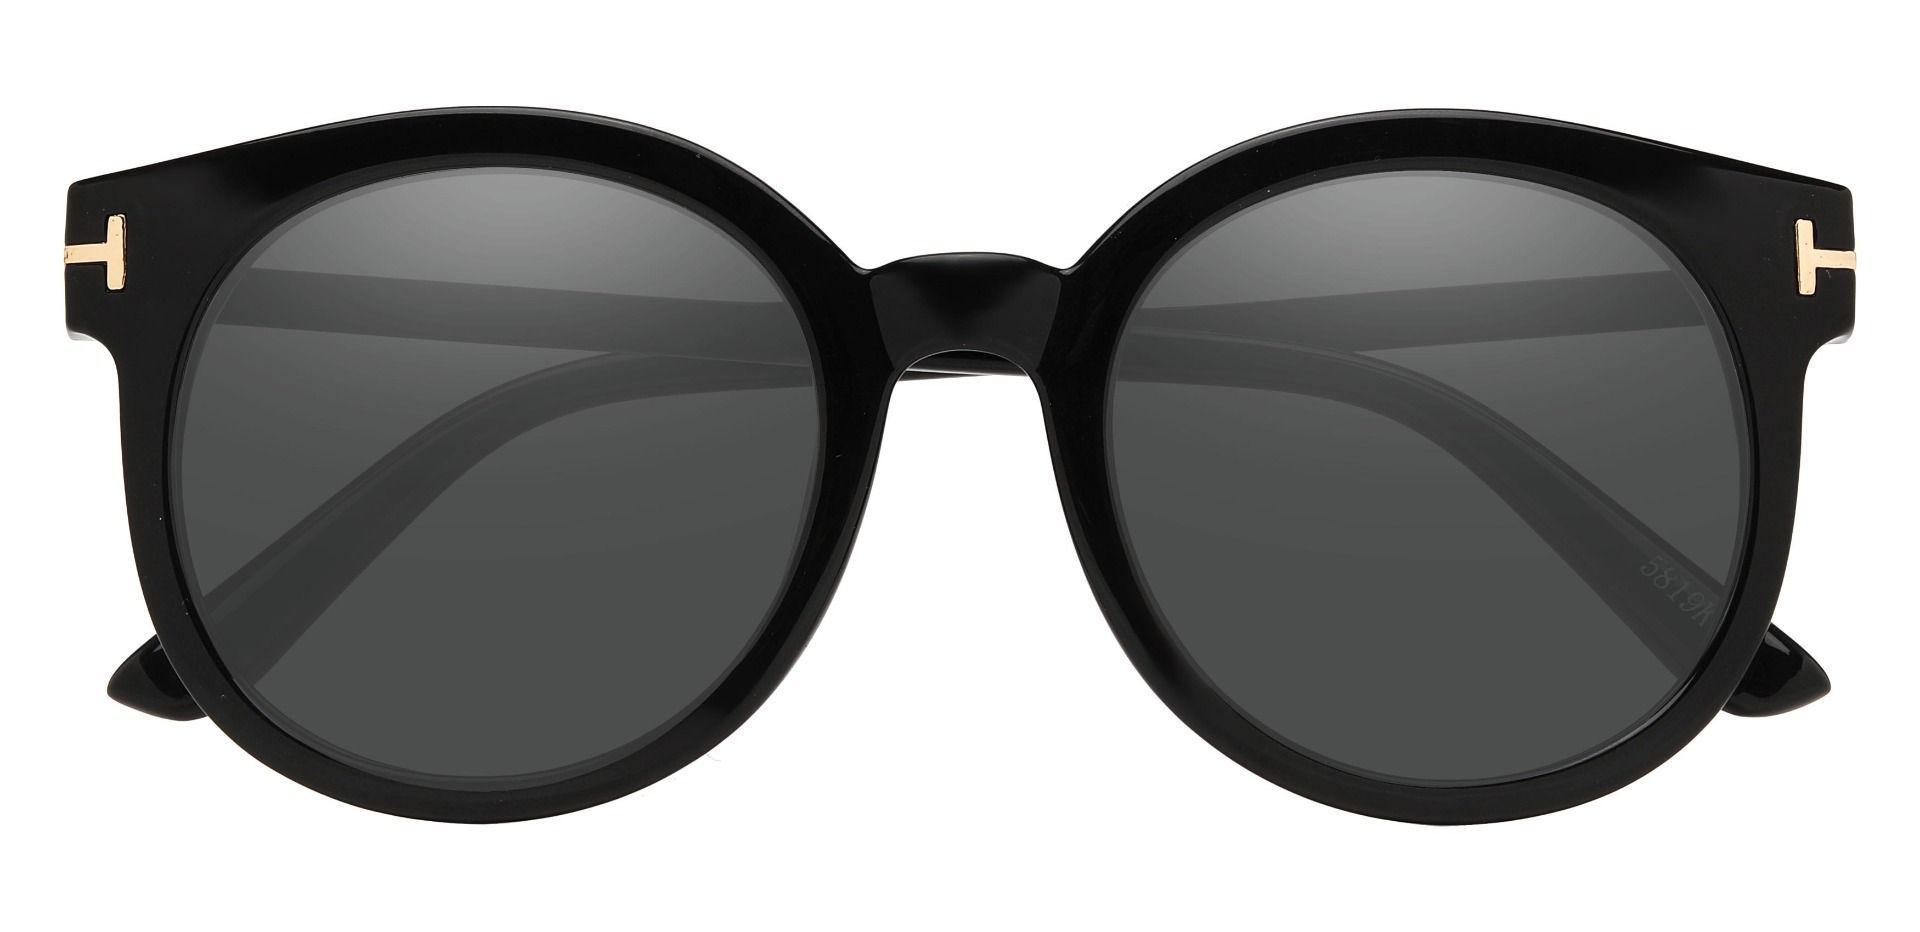 Fortuna Round Reading Sunglasses - Black Frame With Gray Lenses